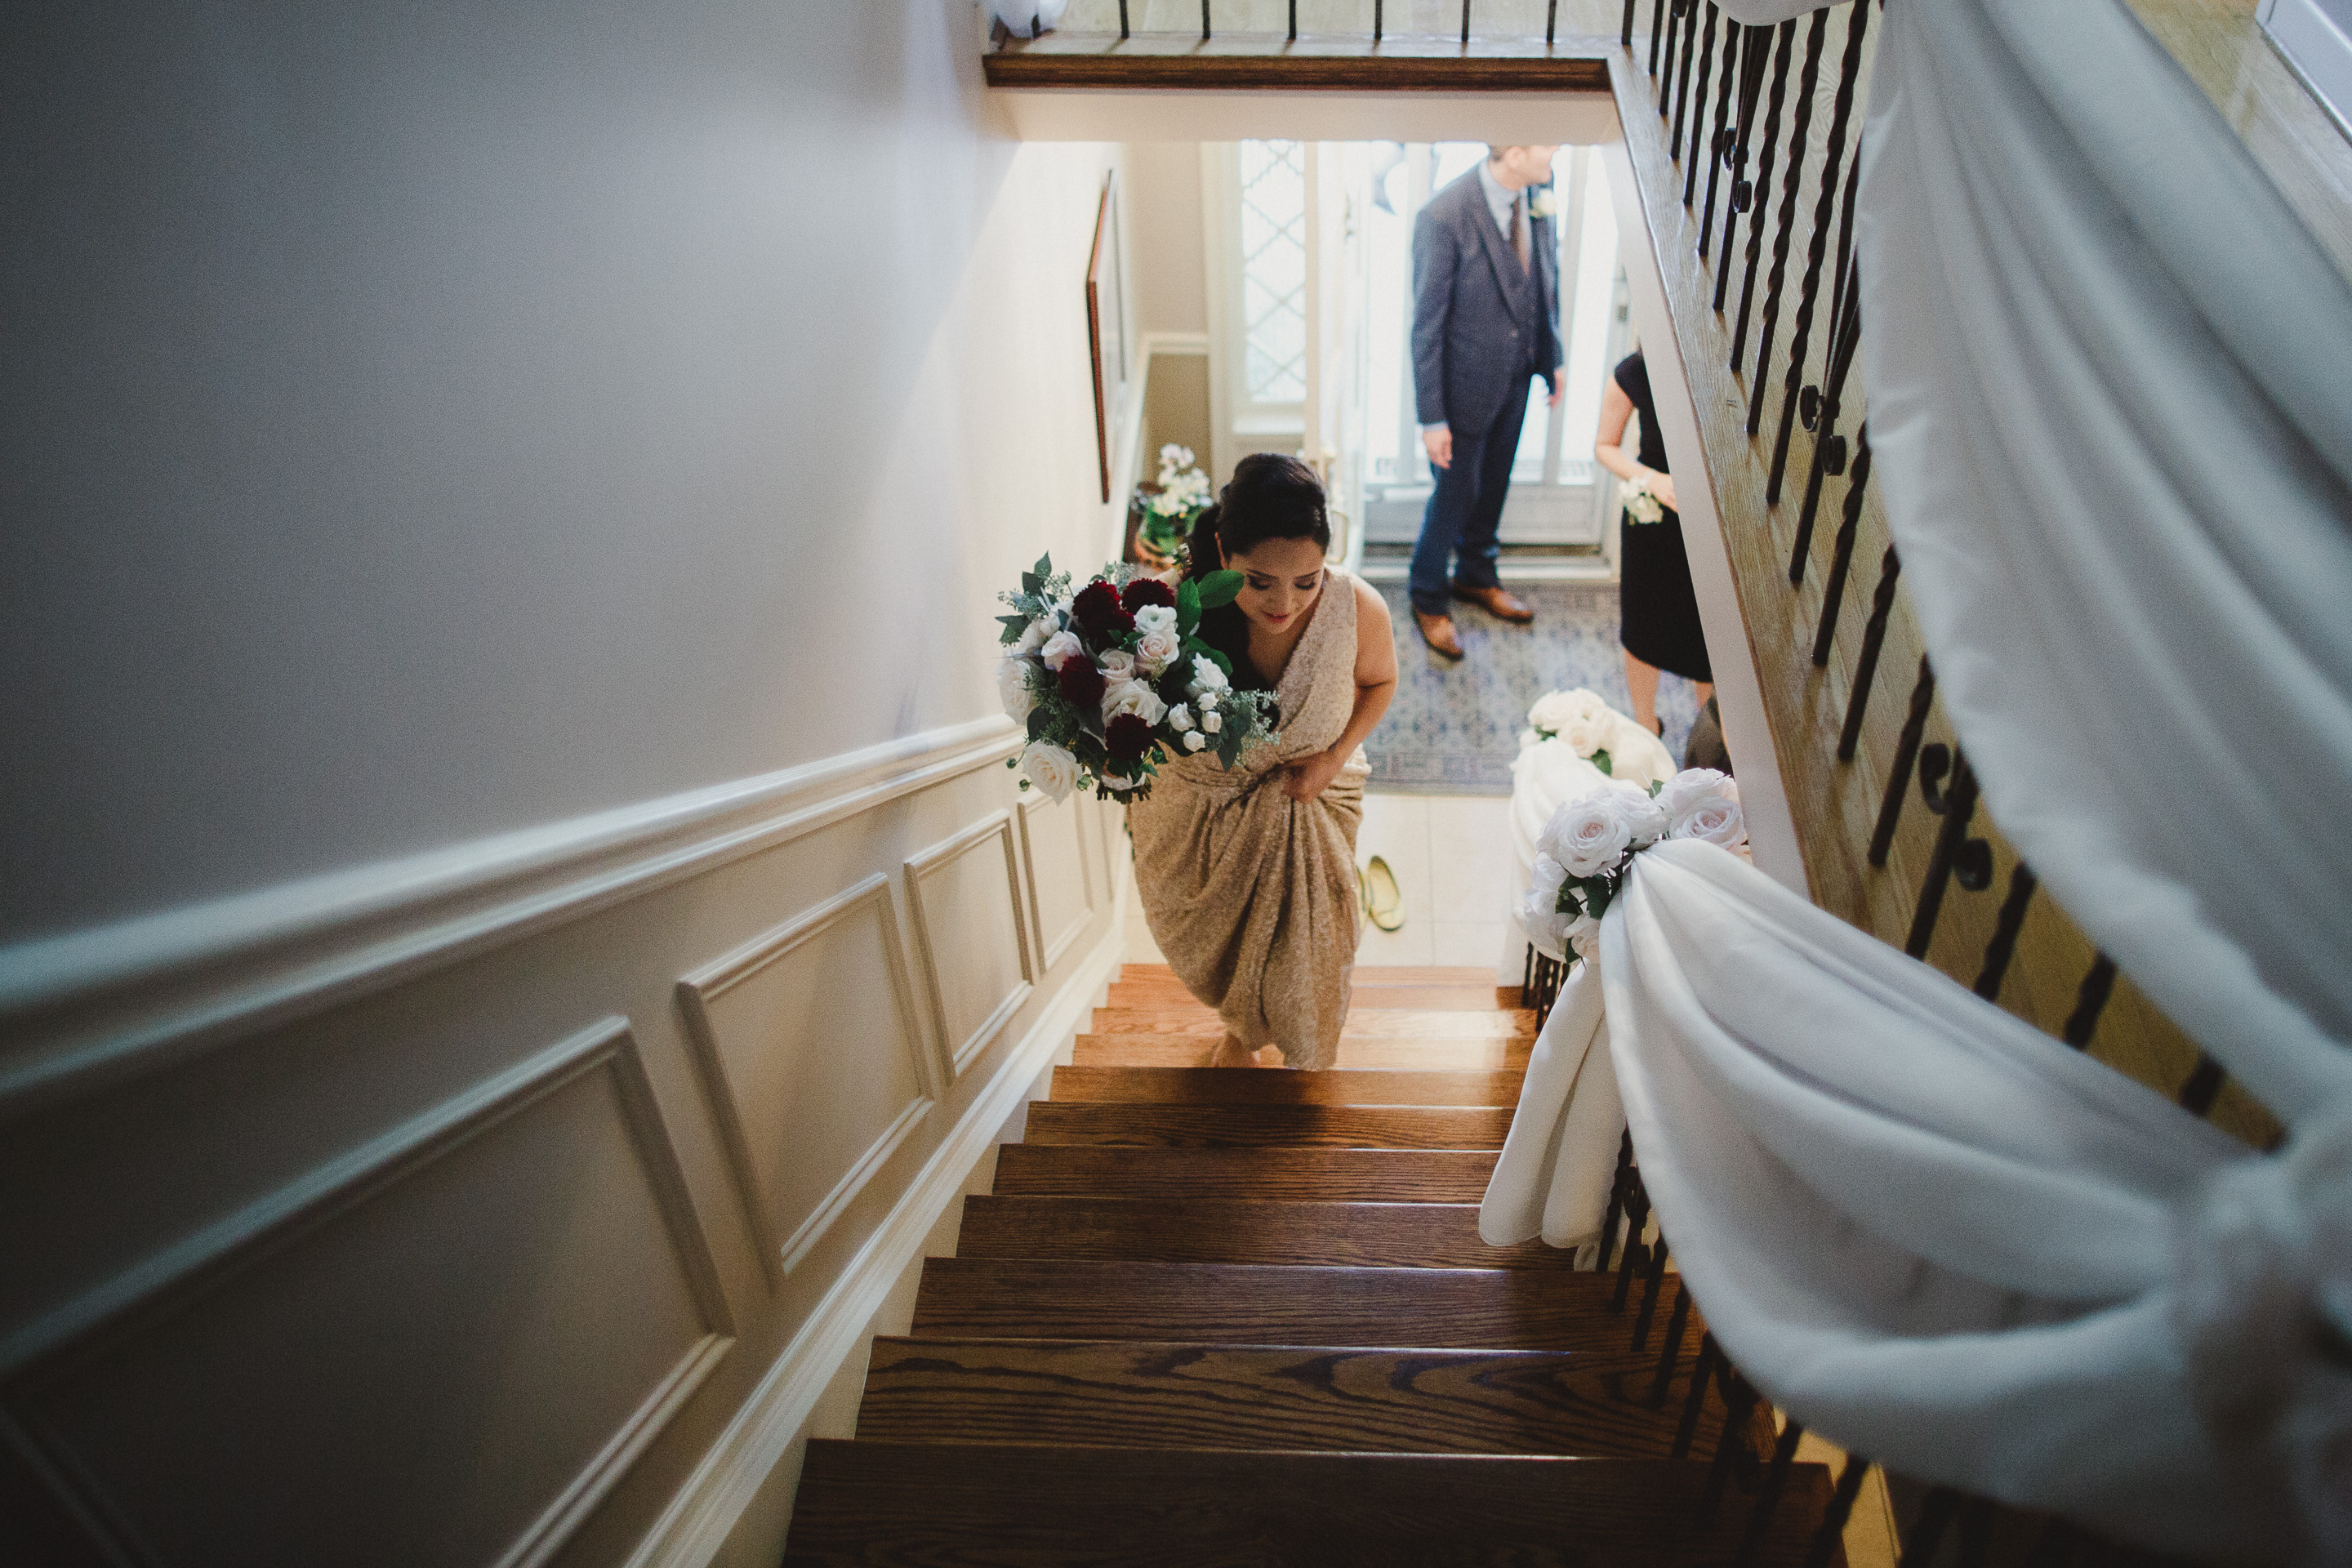 Palais Royale Wedding Pictures by Toronto Wedding Photographer Avangard Photography